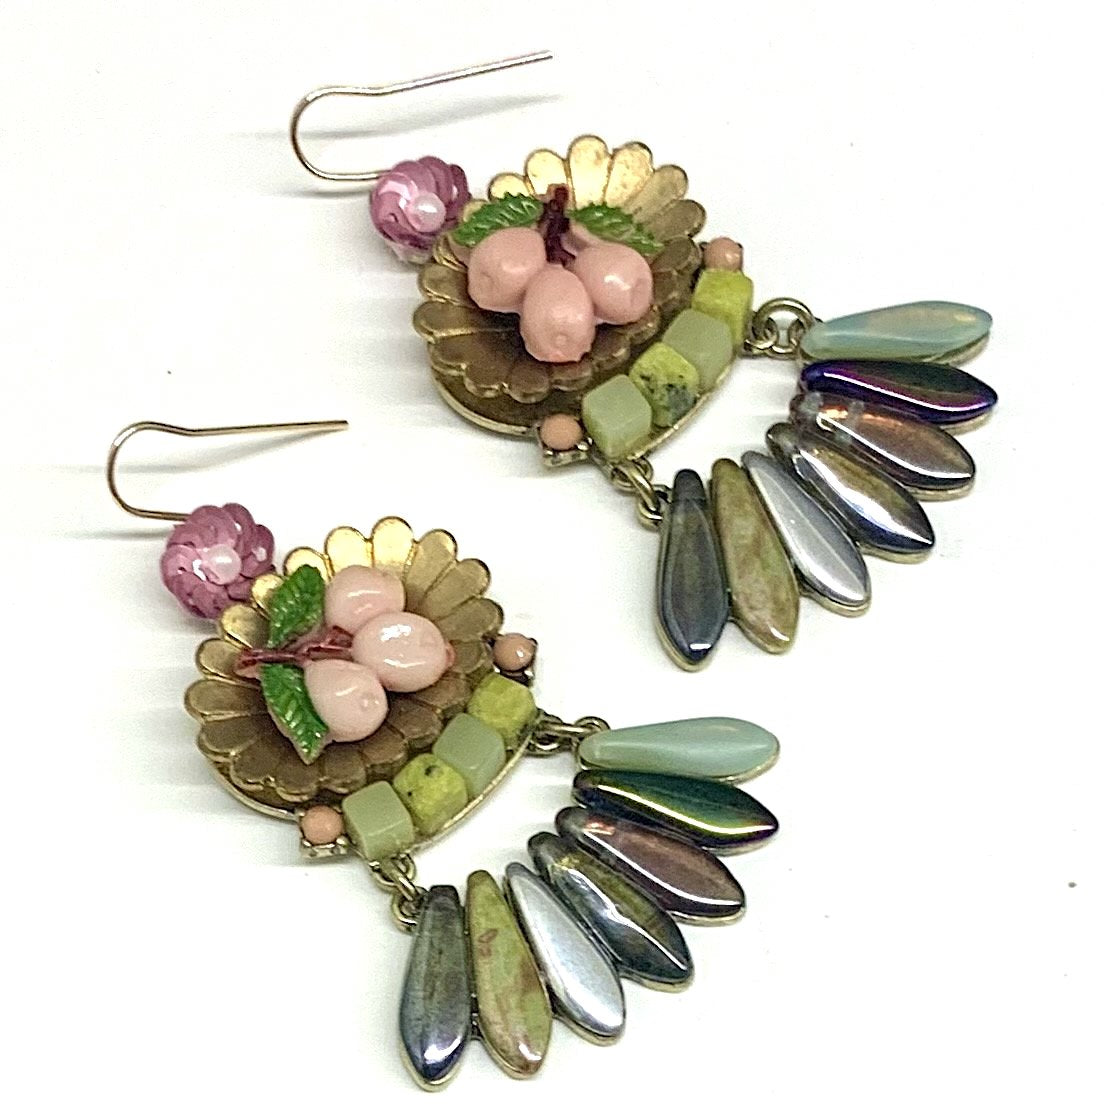 Floral Statement Earrings